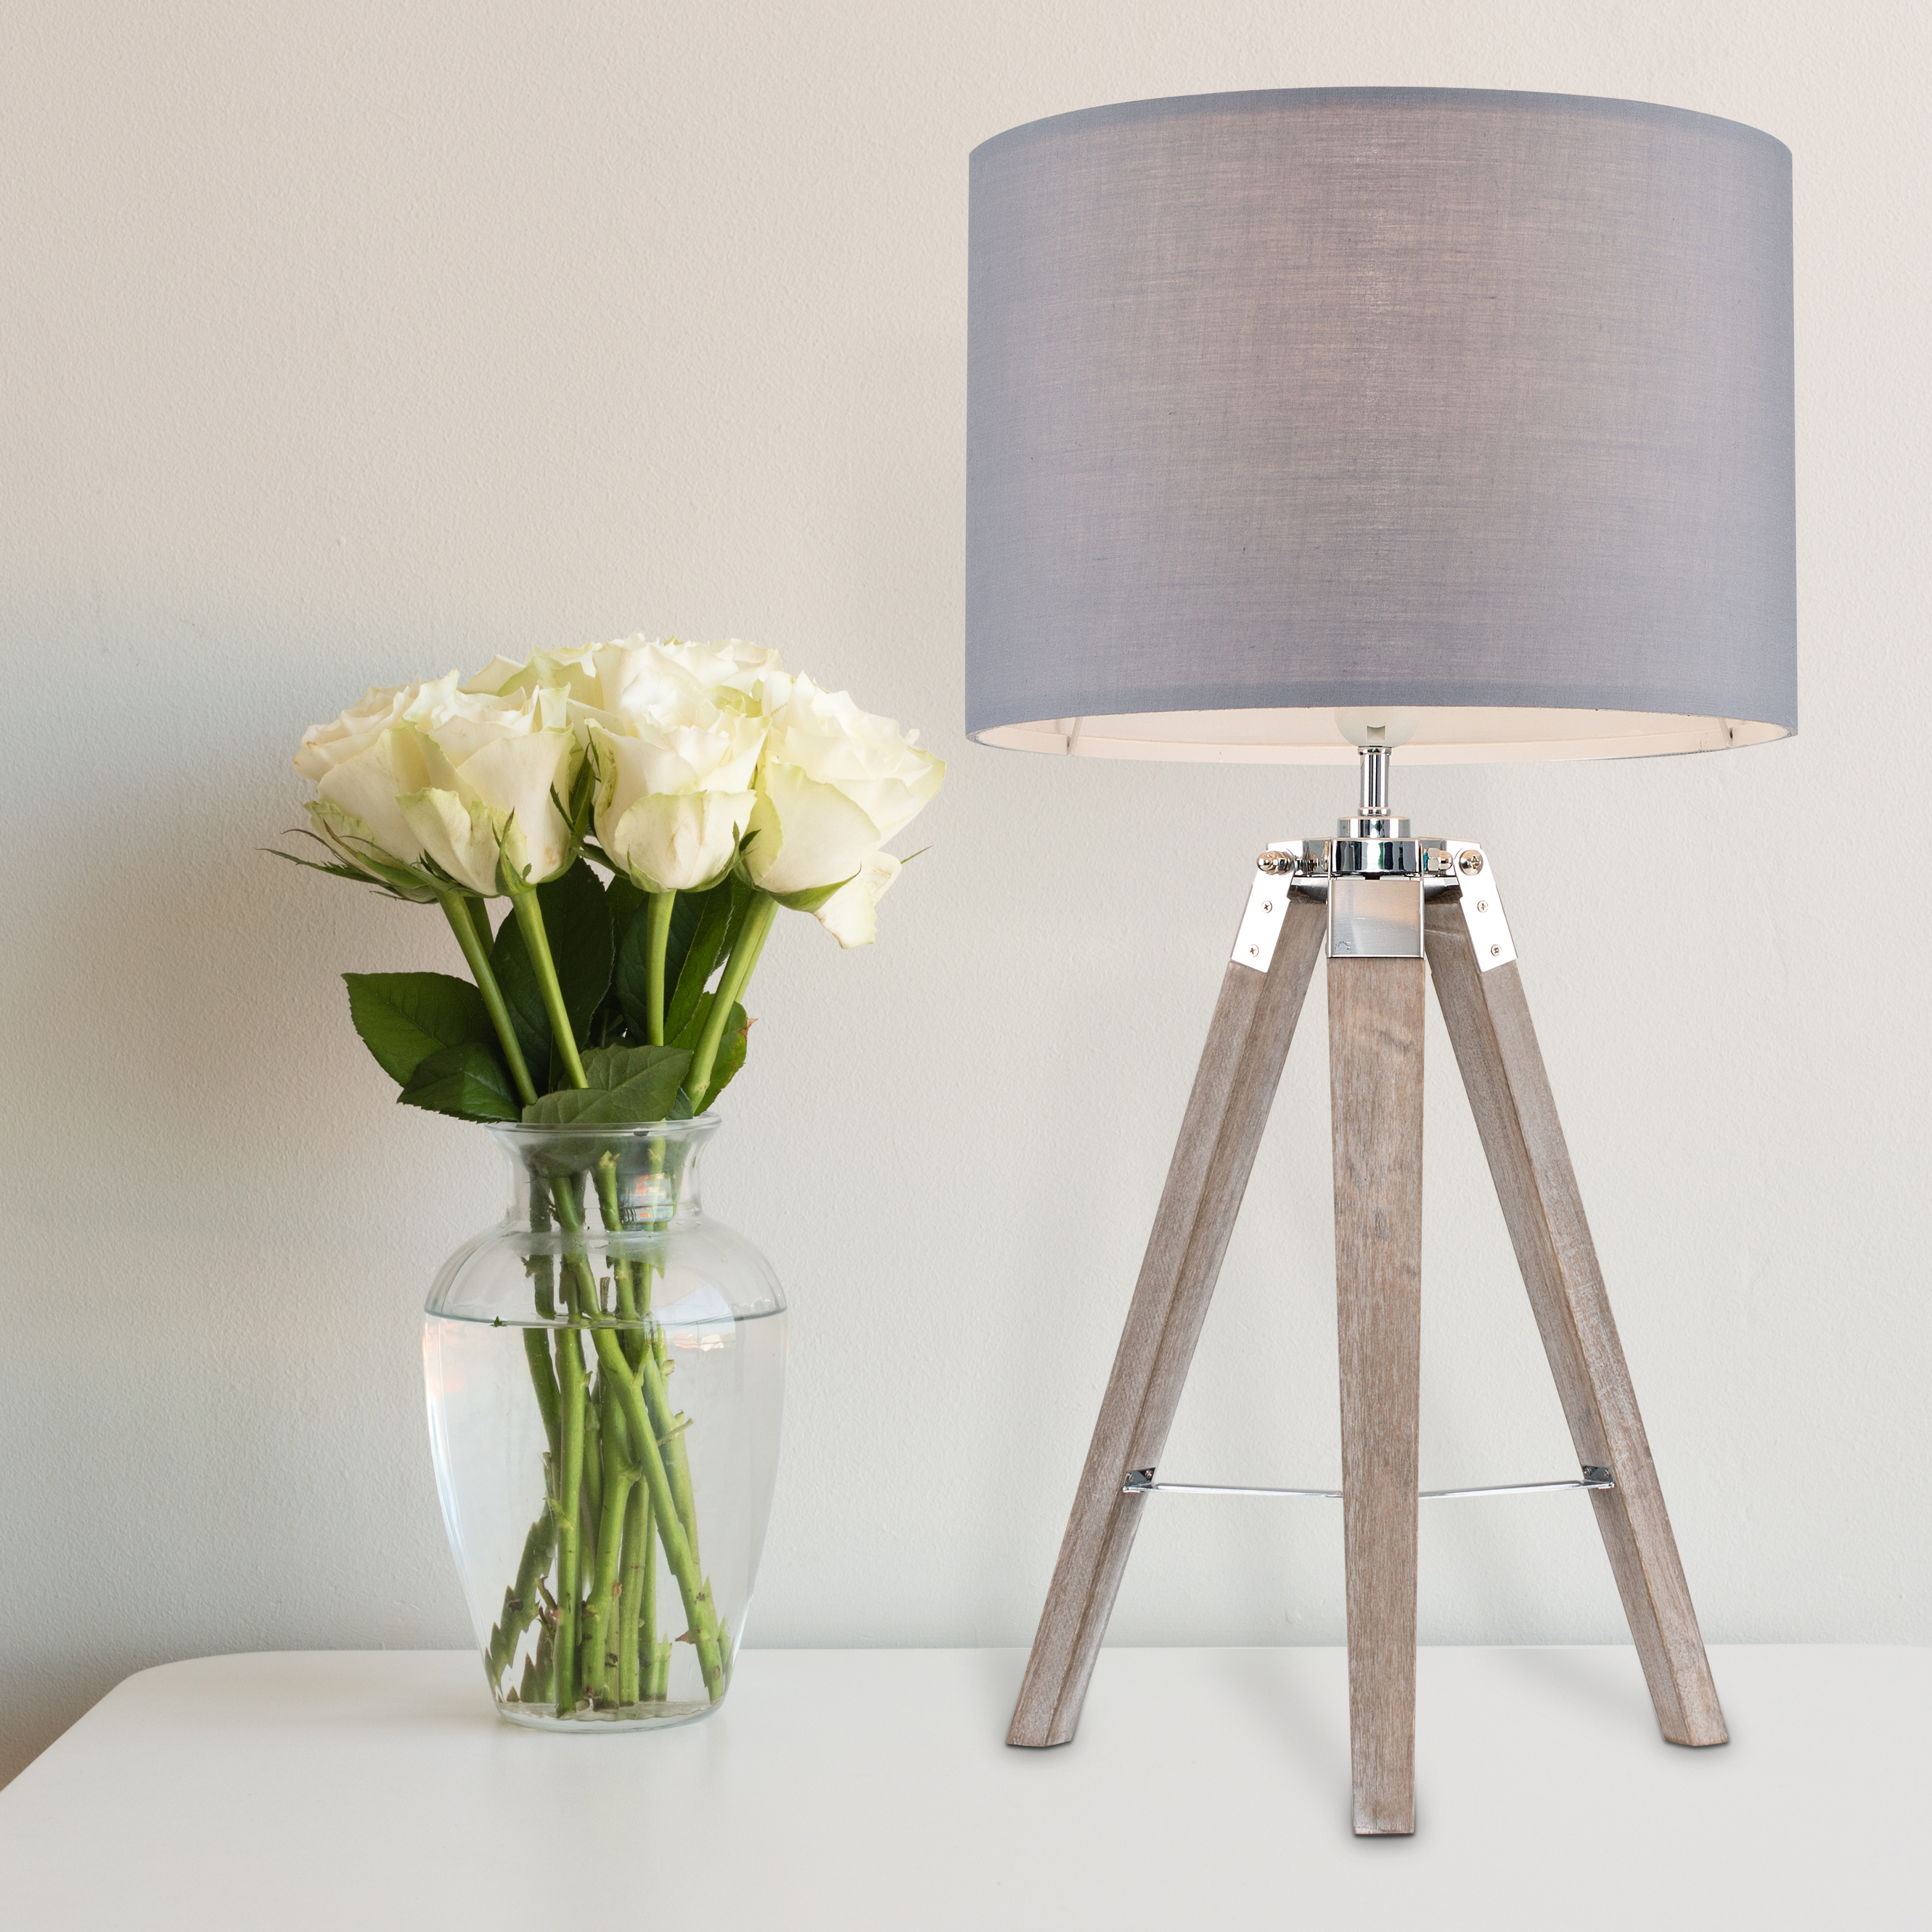 Light Wood Tripod Table Lamp With Grey, Grey Wooden Table Lamp Base